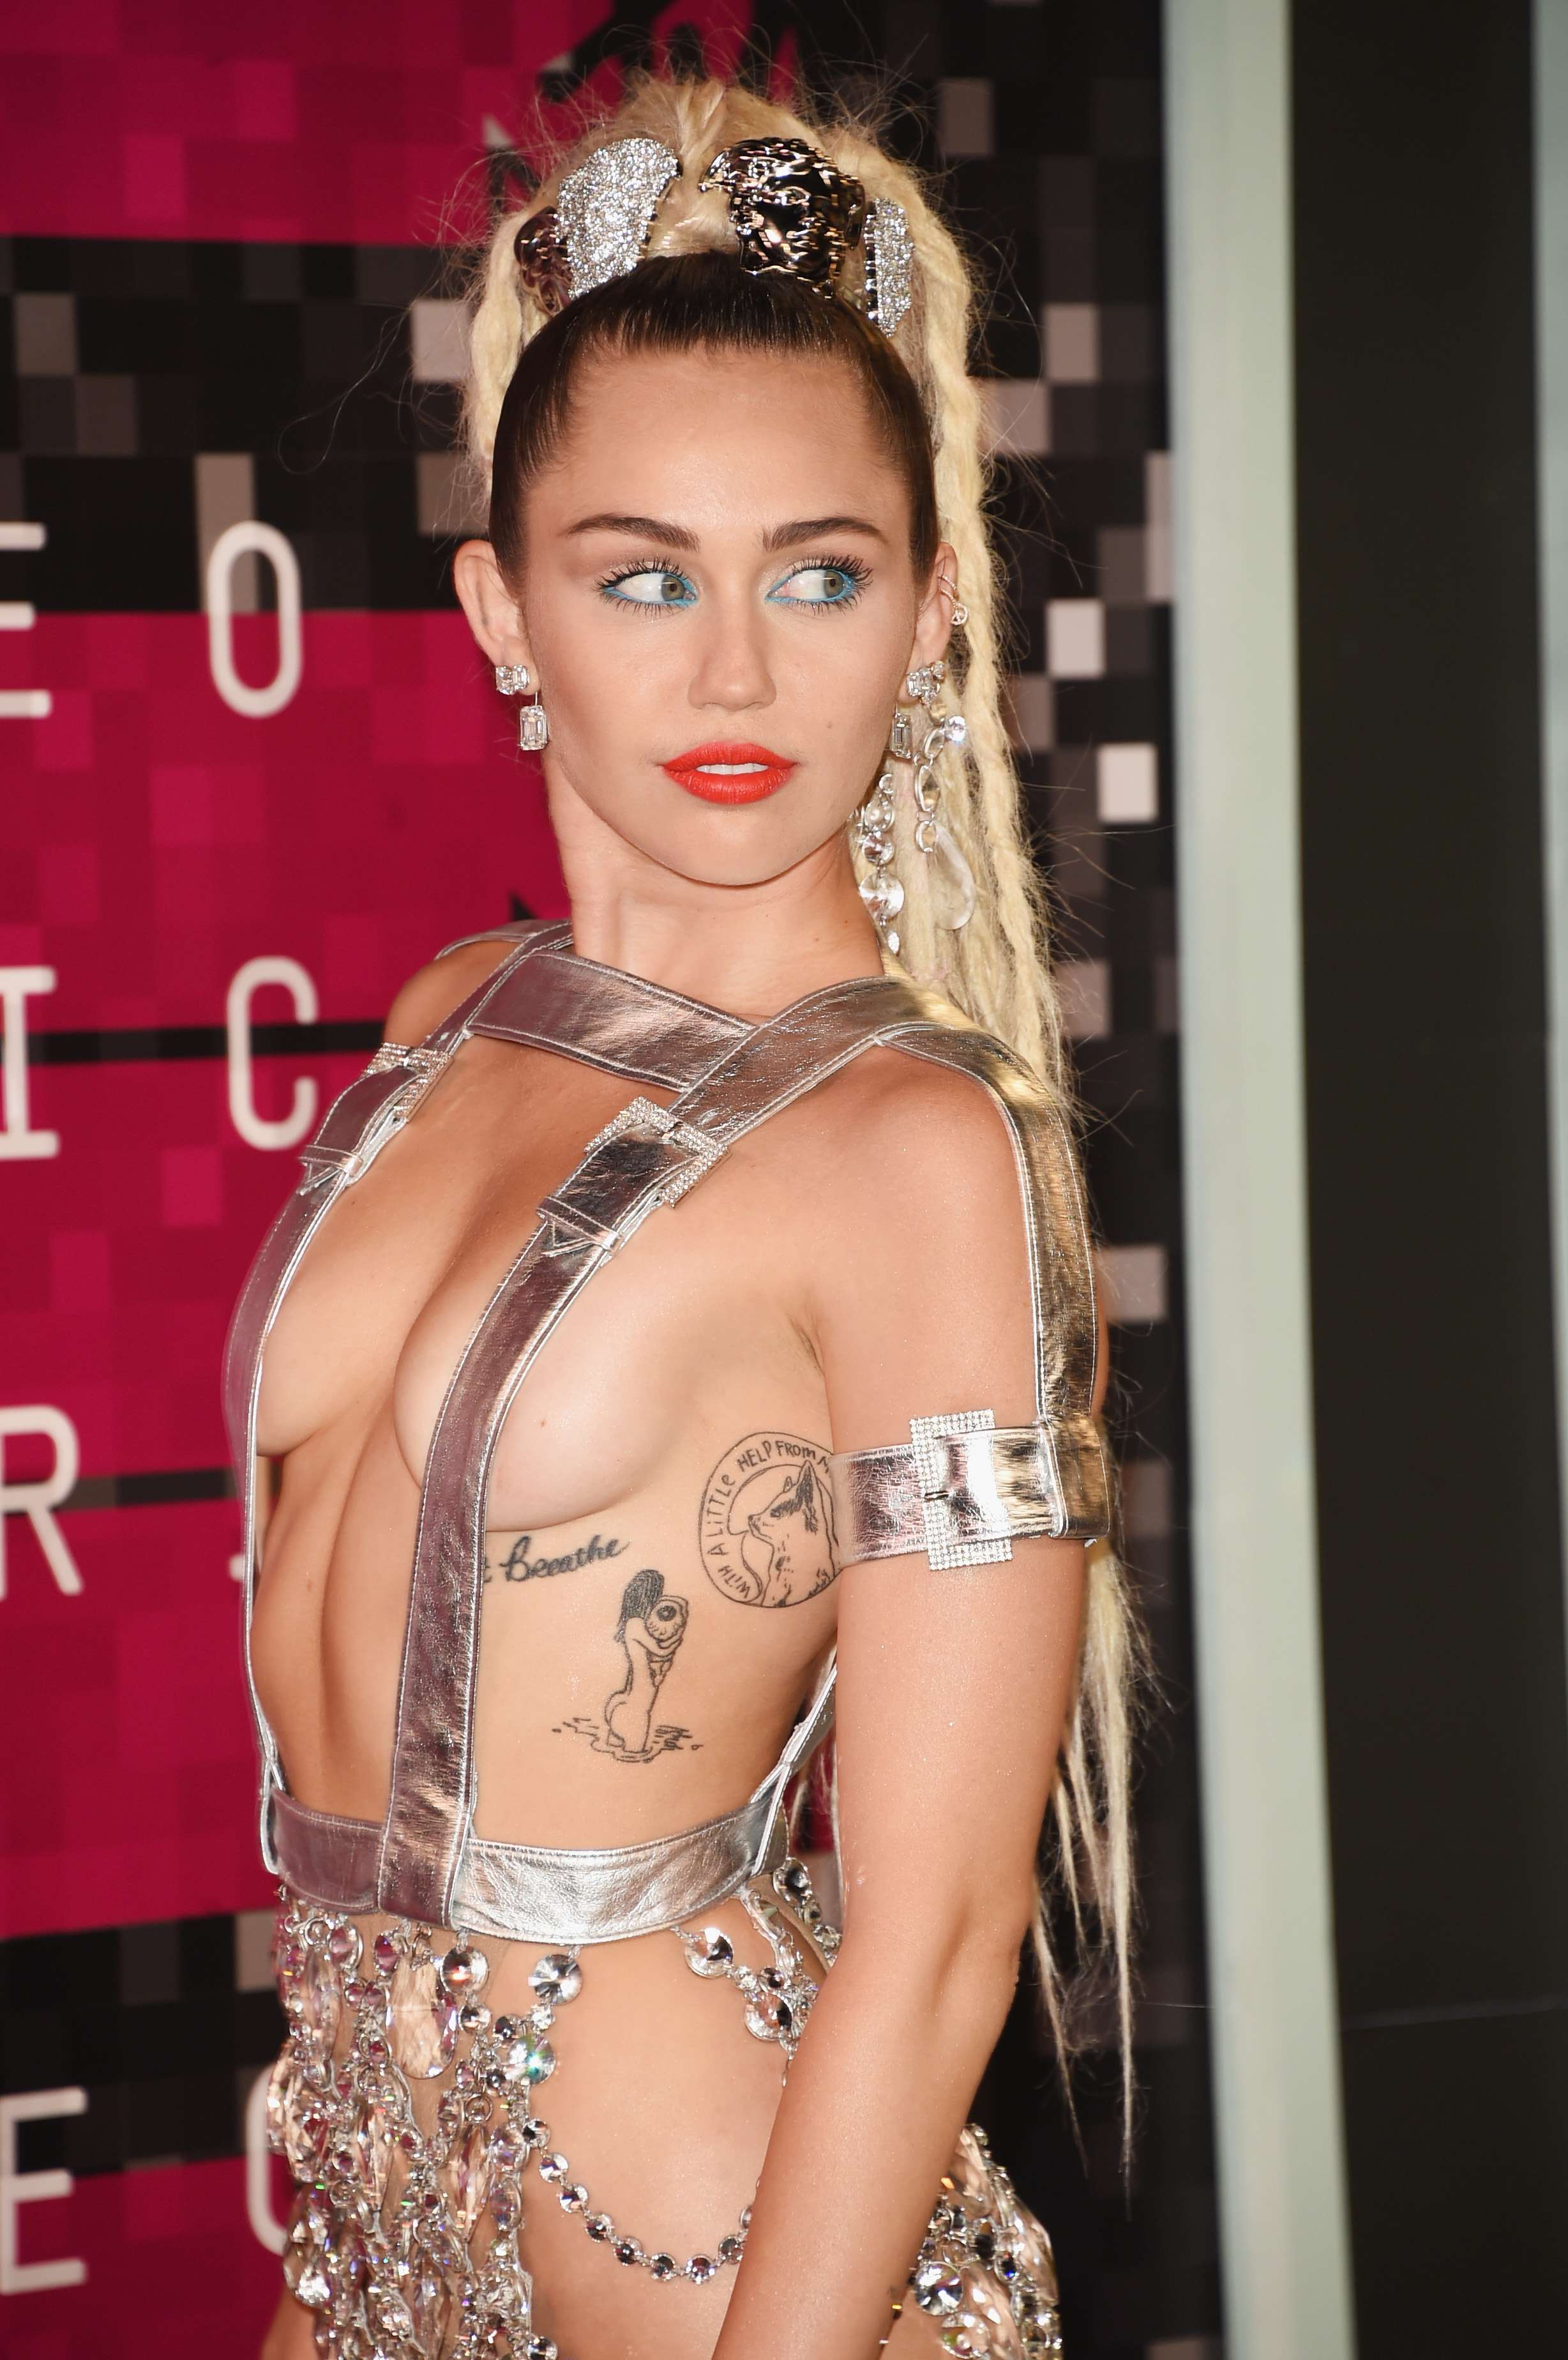 Sexy pics of Miley Cyrus from MTV VMA 2015